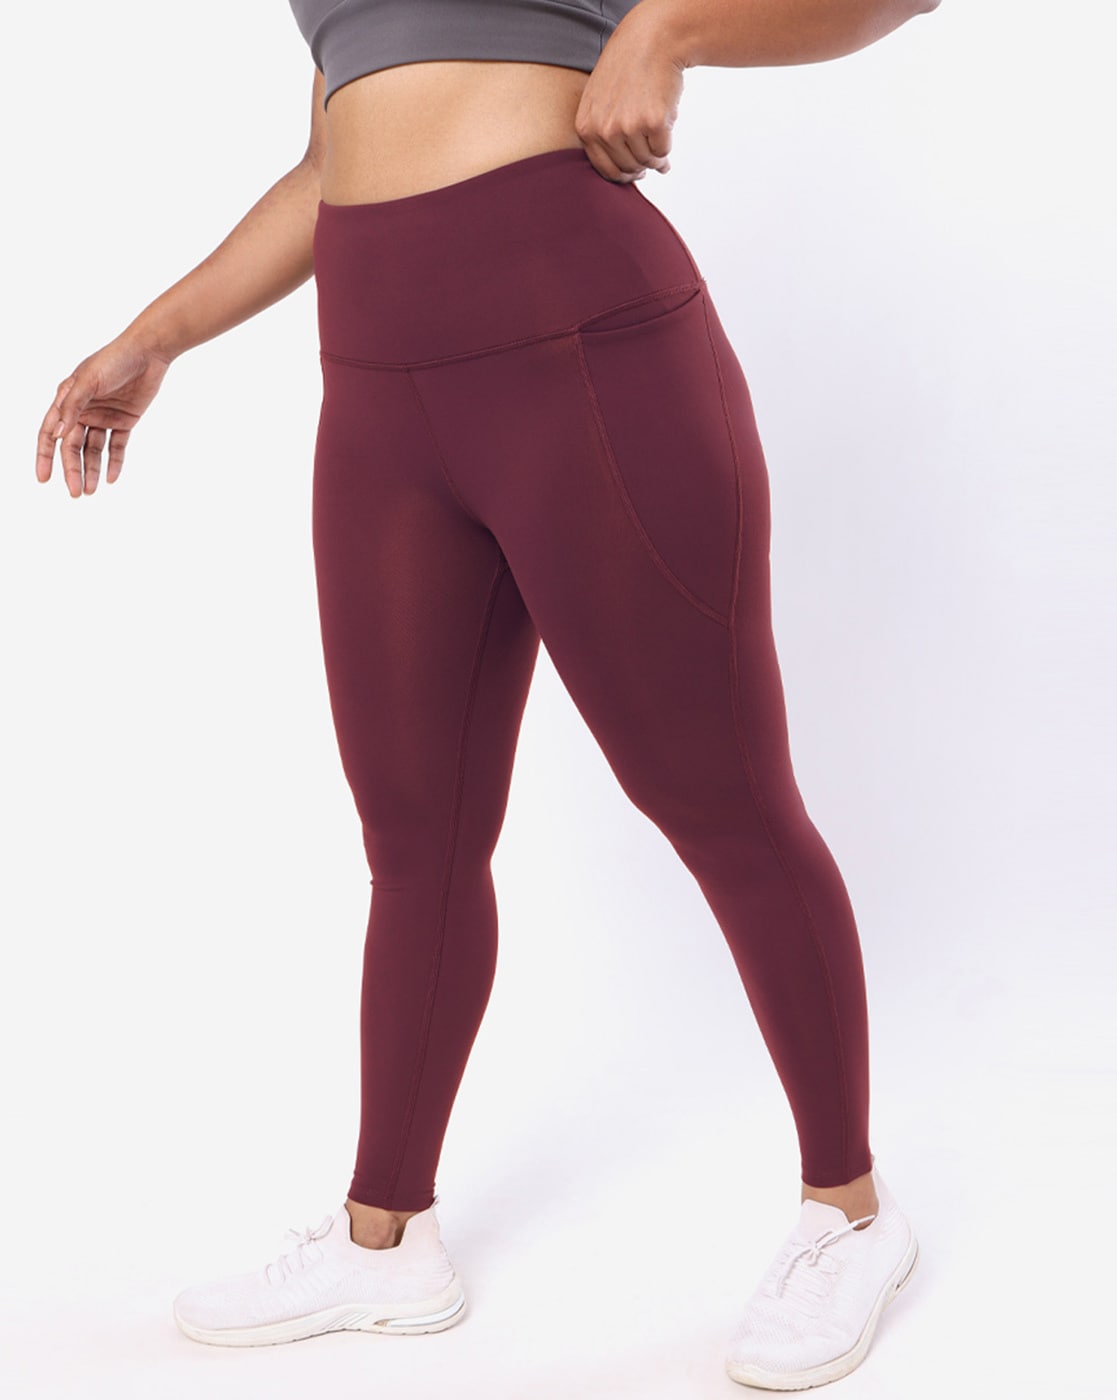 Burgundy Solid Leggings with Yoga Band - Women's One Size – Apple Girl  Boutique